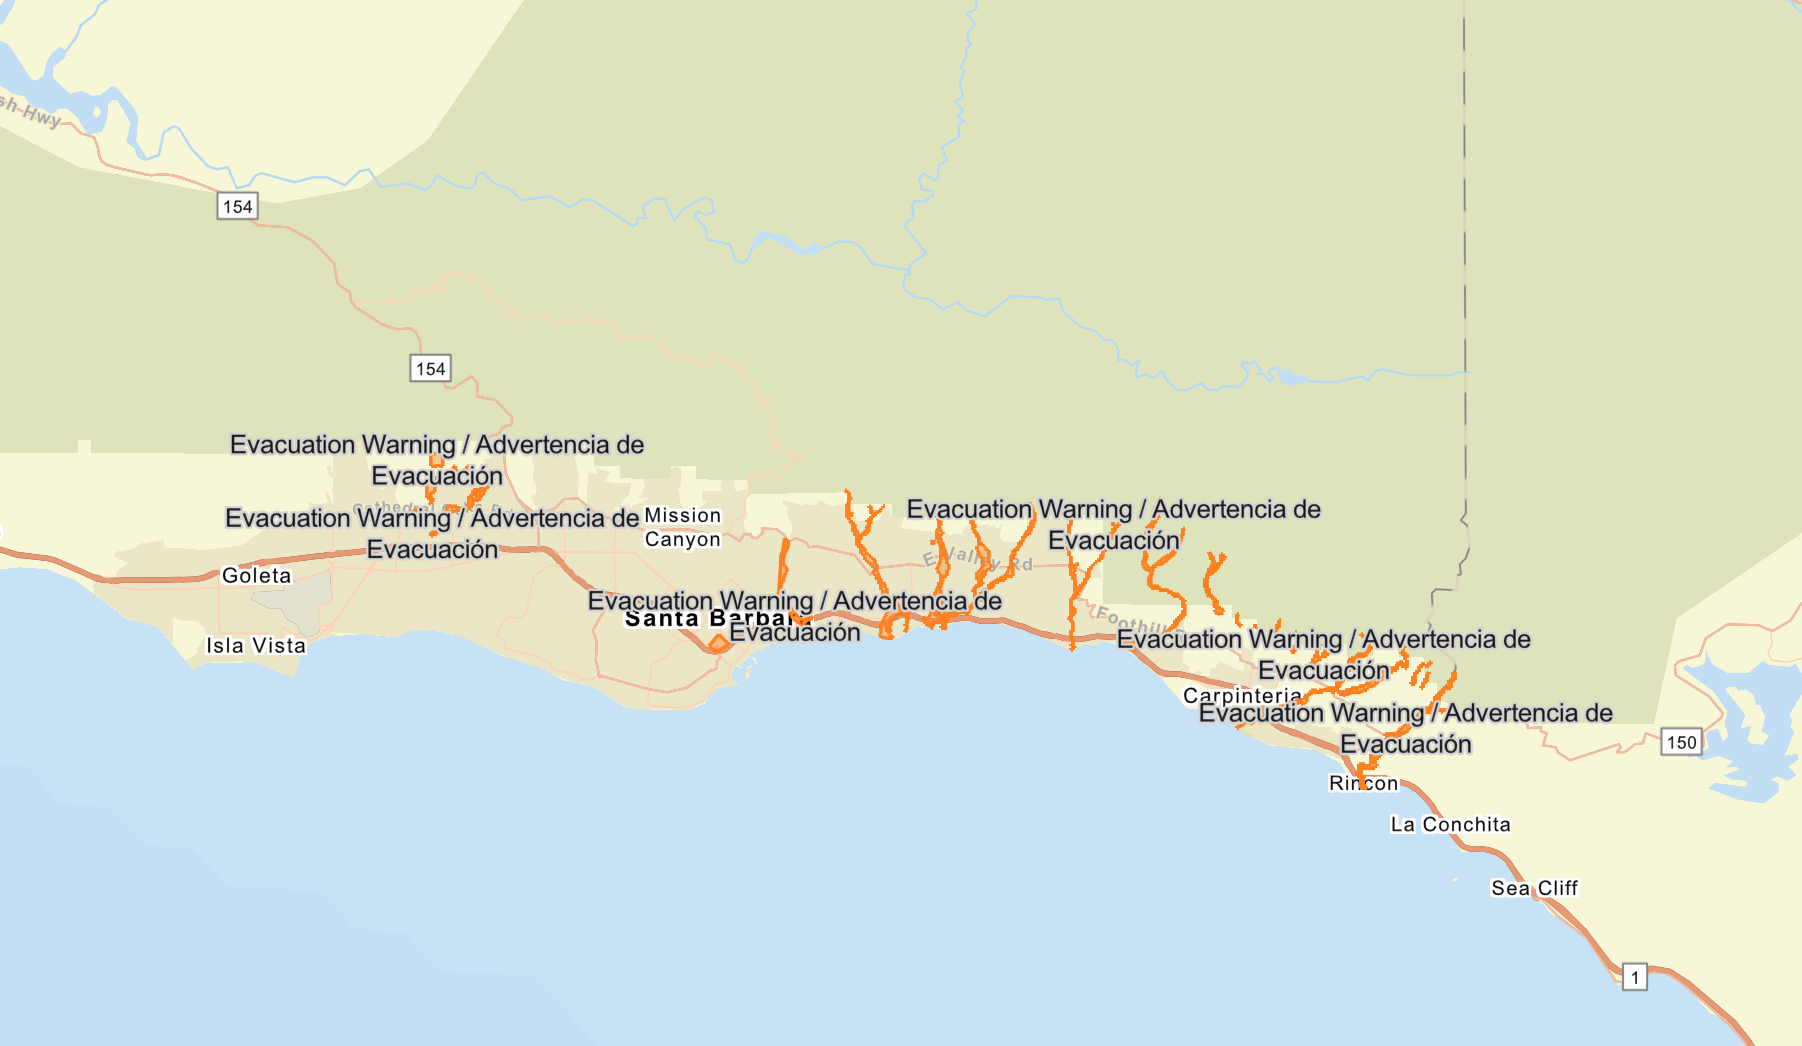 Santa Barbara County officials have issued evacuation warnings, indicated in orange, for several neighbourhoods